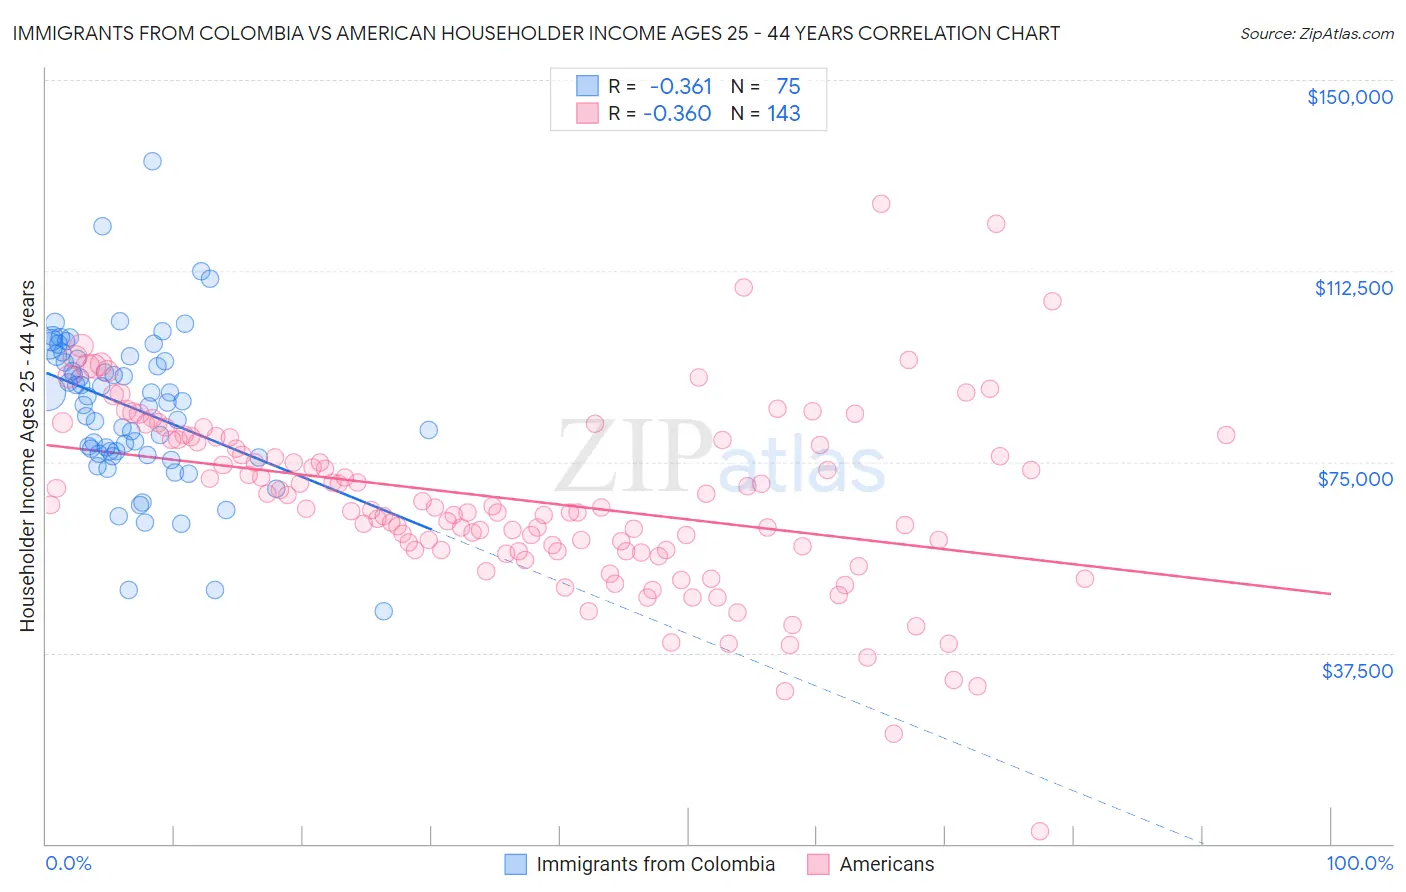 Immigrants from Colombia vs American Householder Income Ages 25 - 44 years